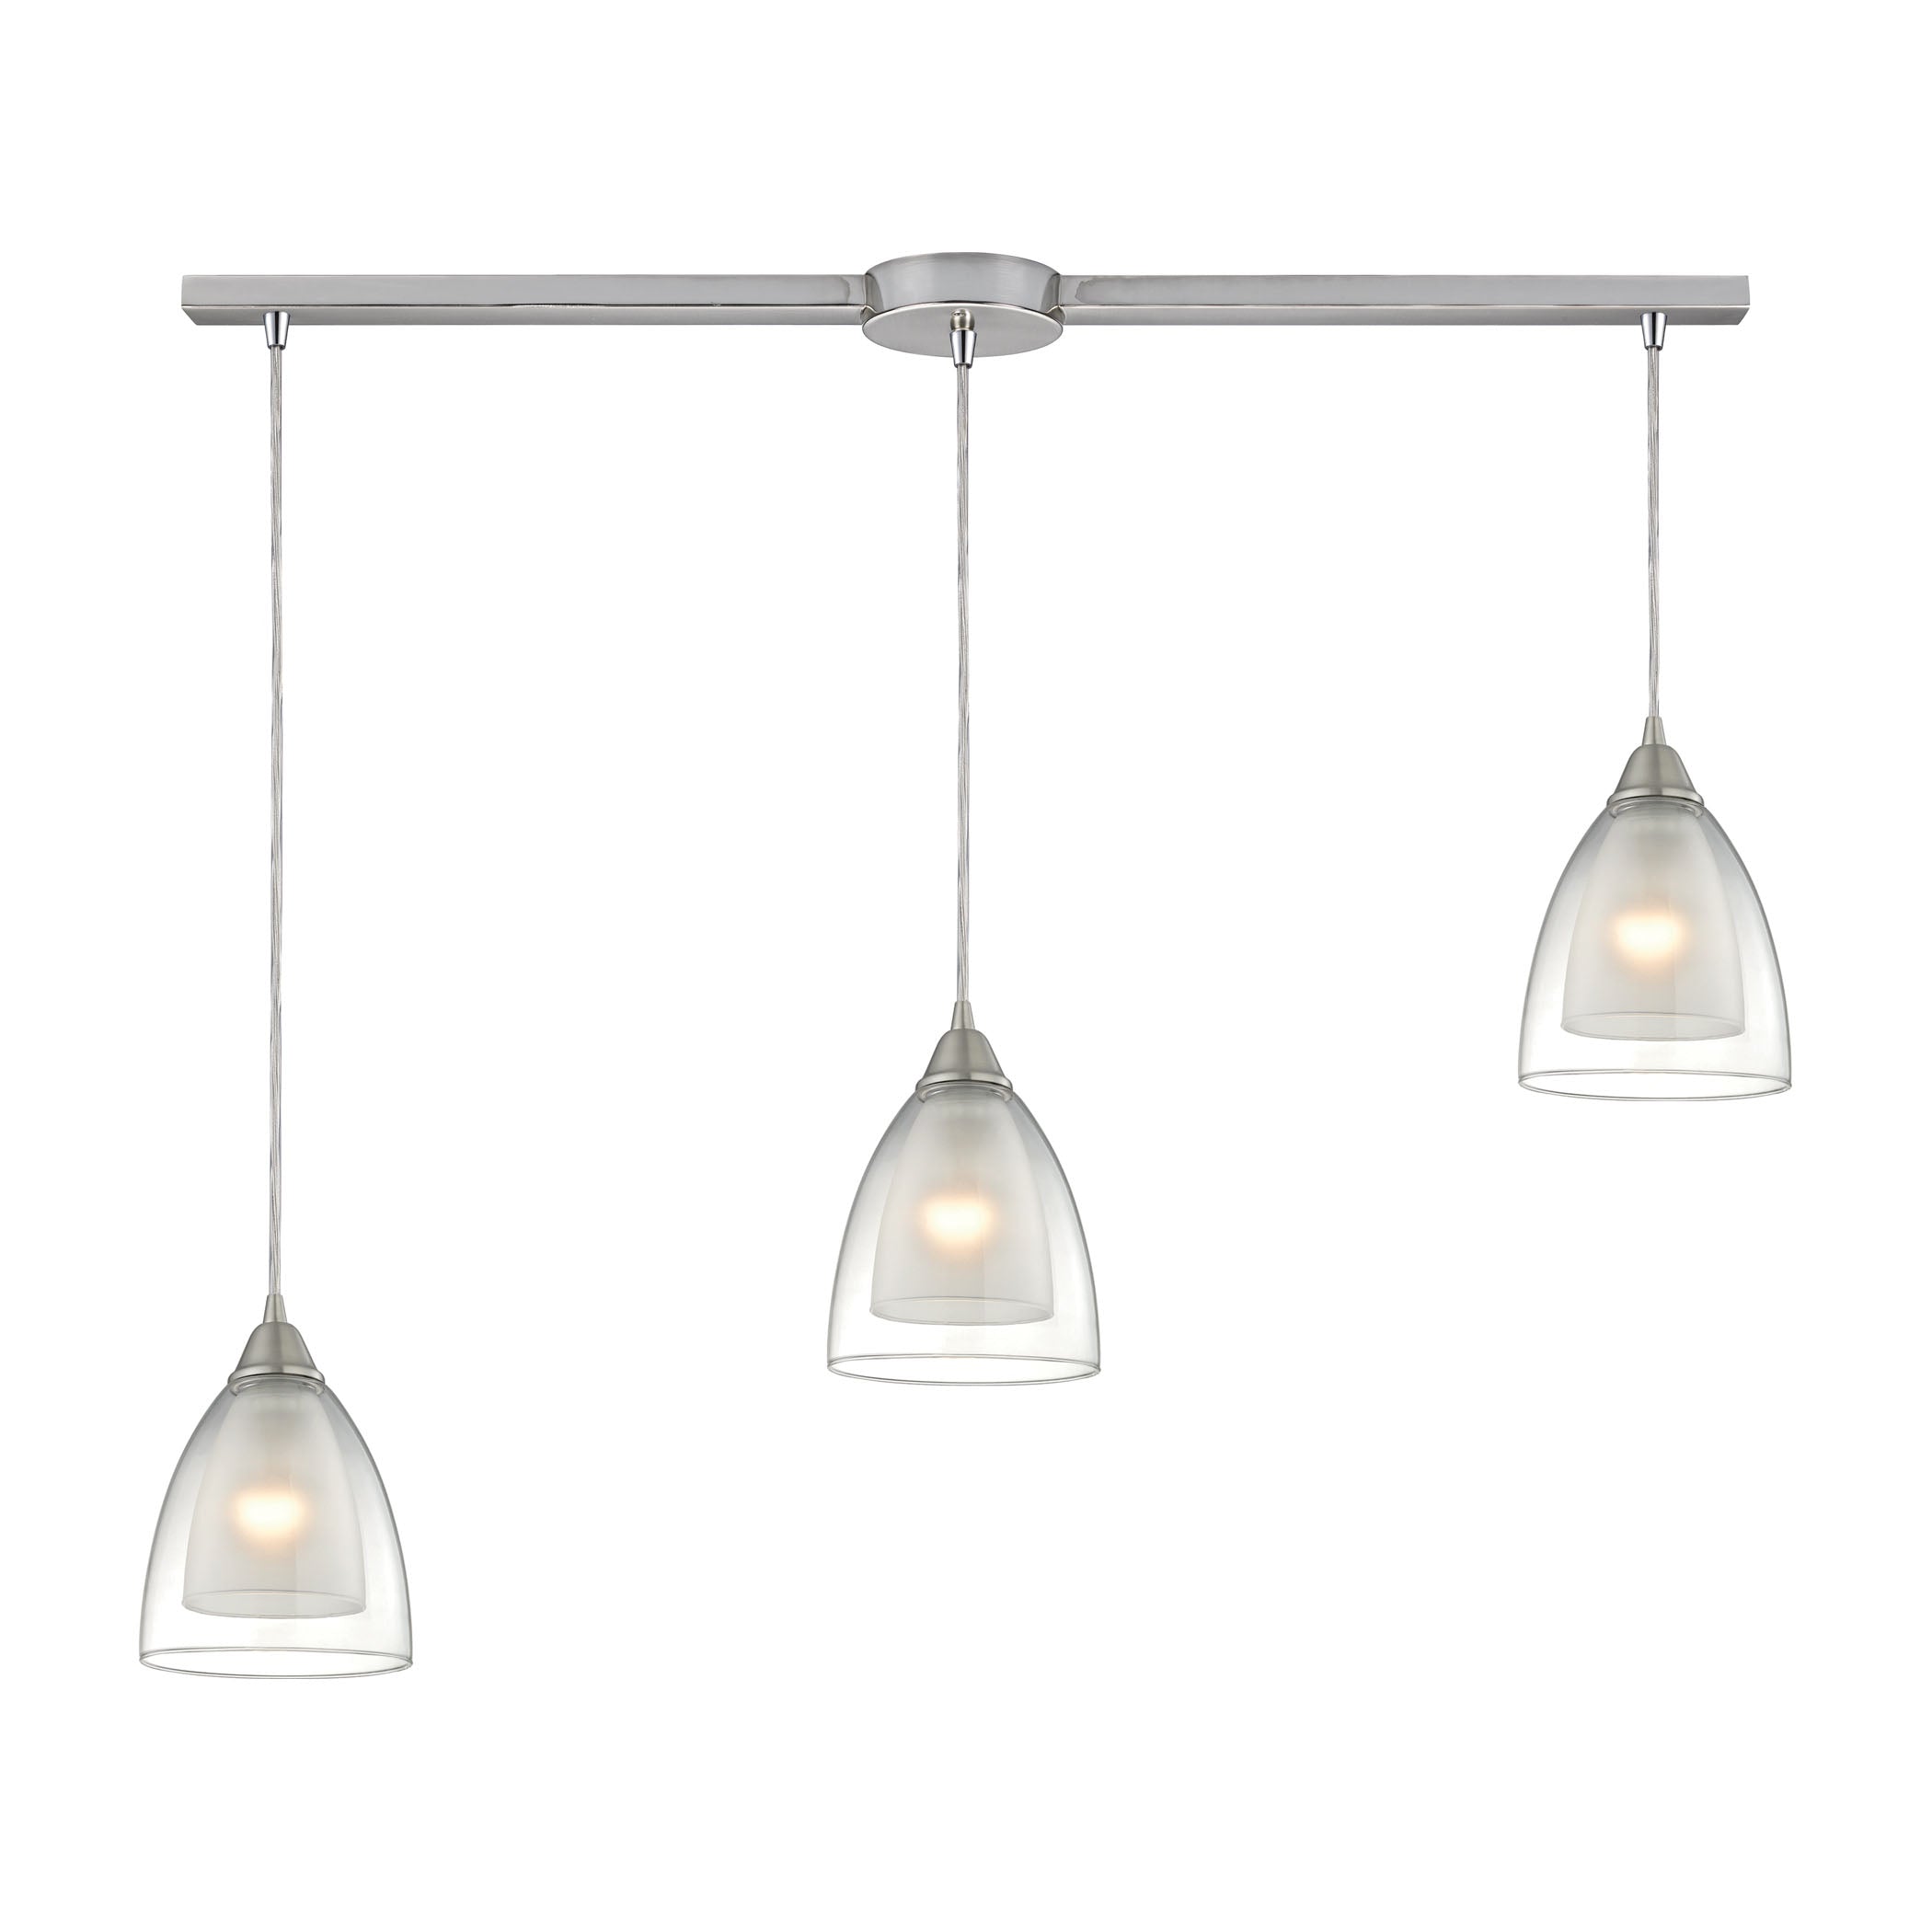 ELK Lighting 10464/3L Layers 3-Light Linear Pendant Fixture in Satin Nickel with Clear Glass